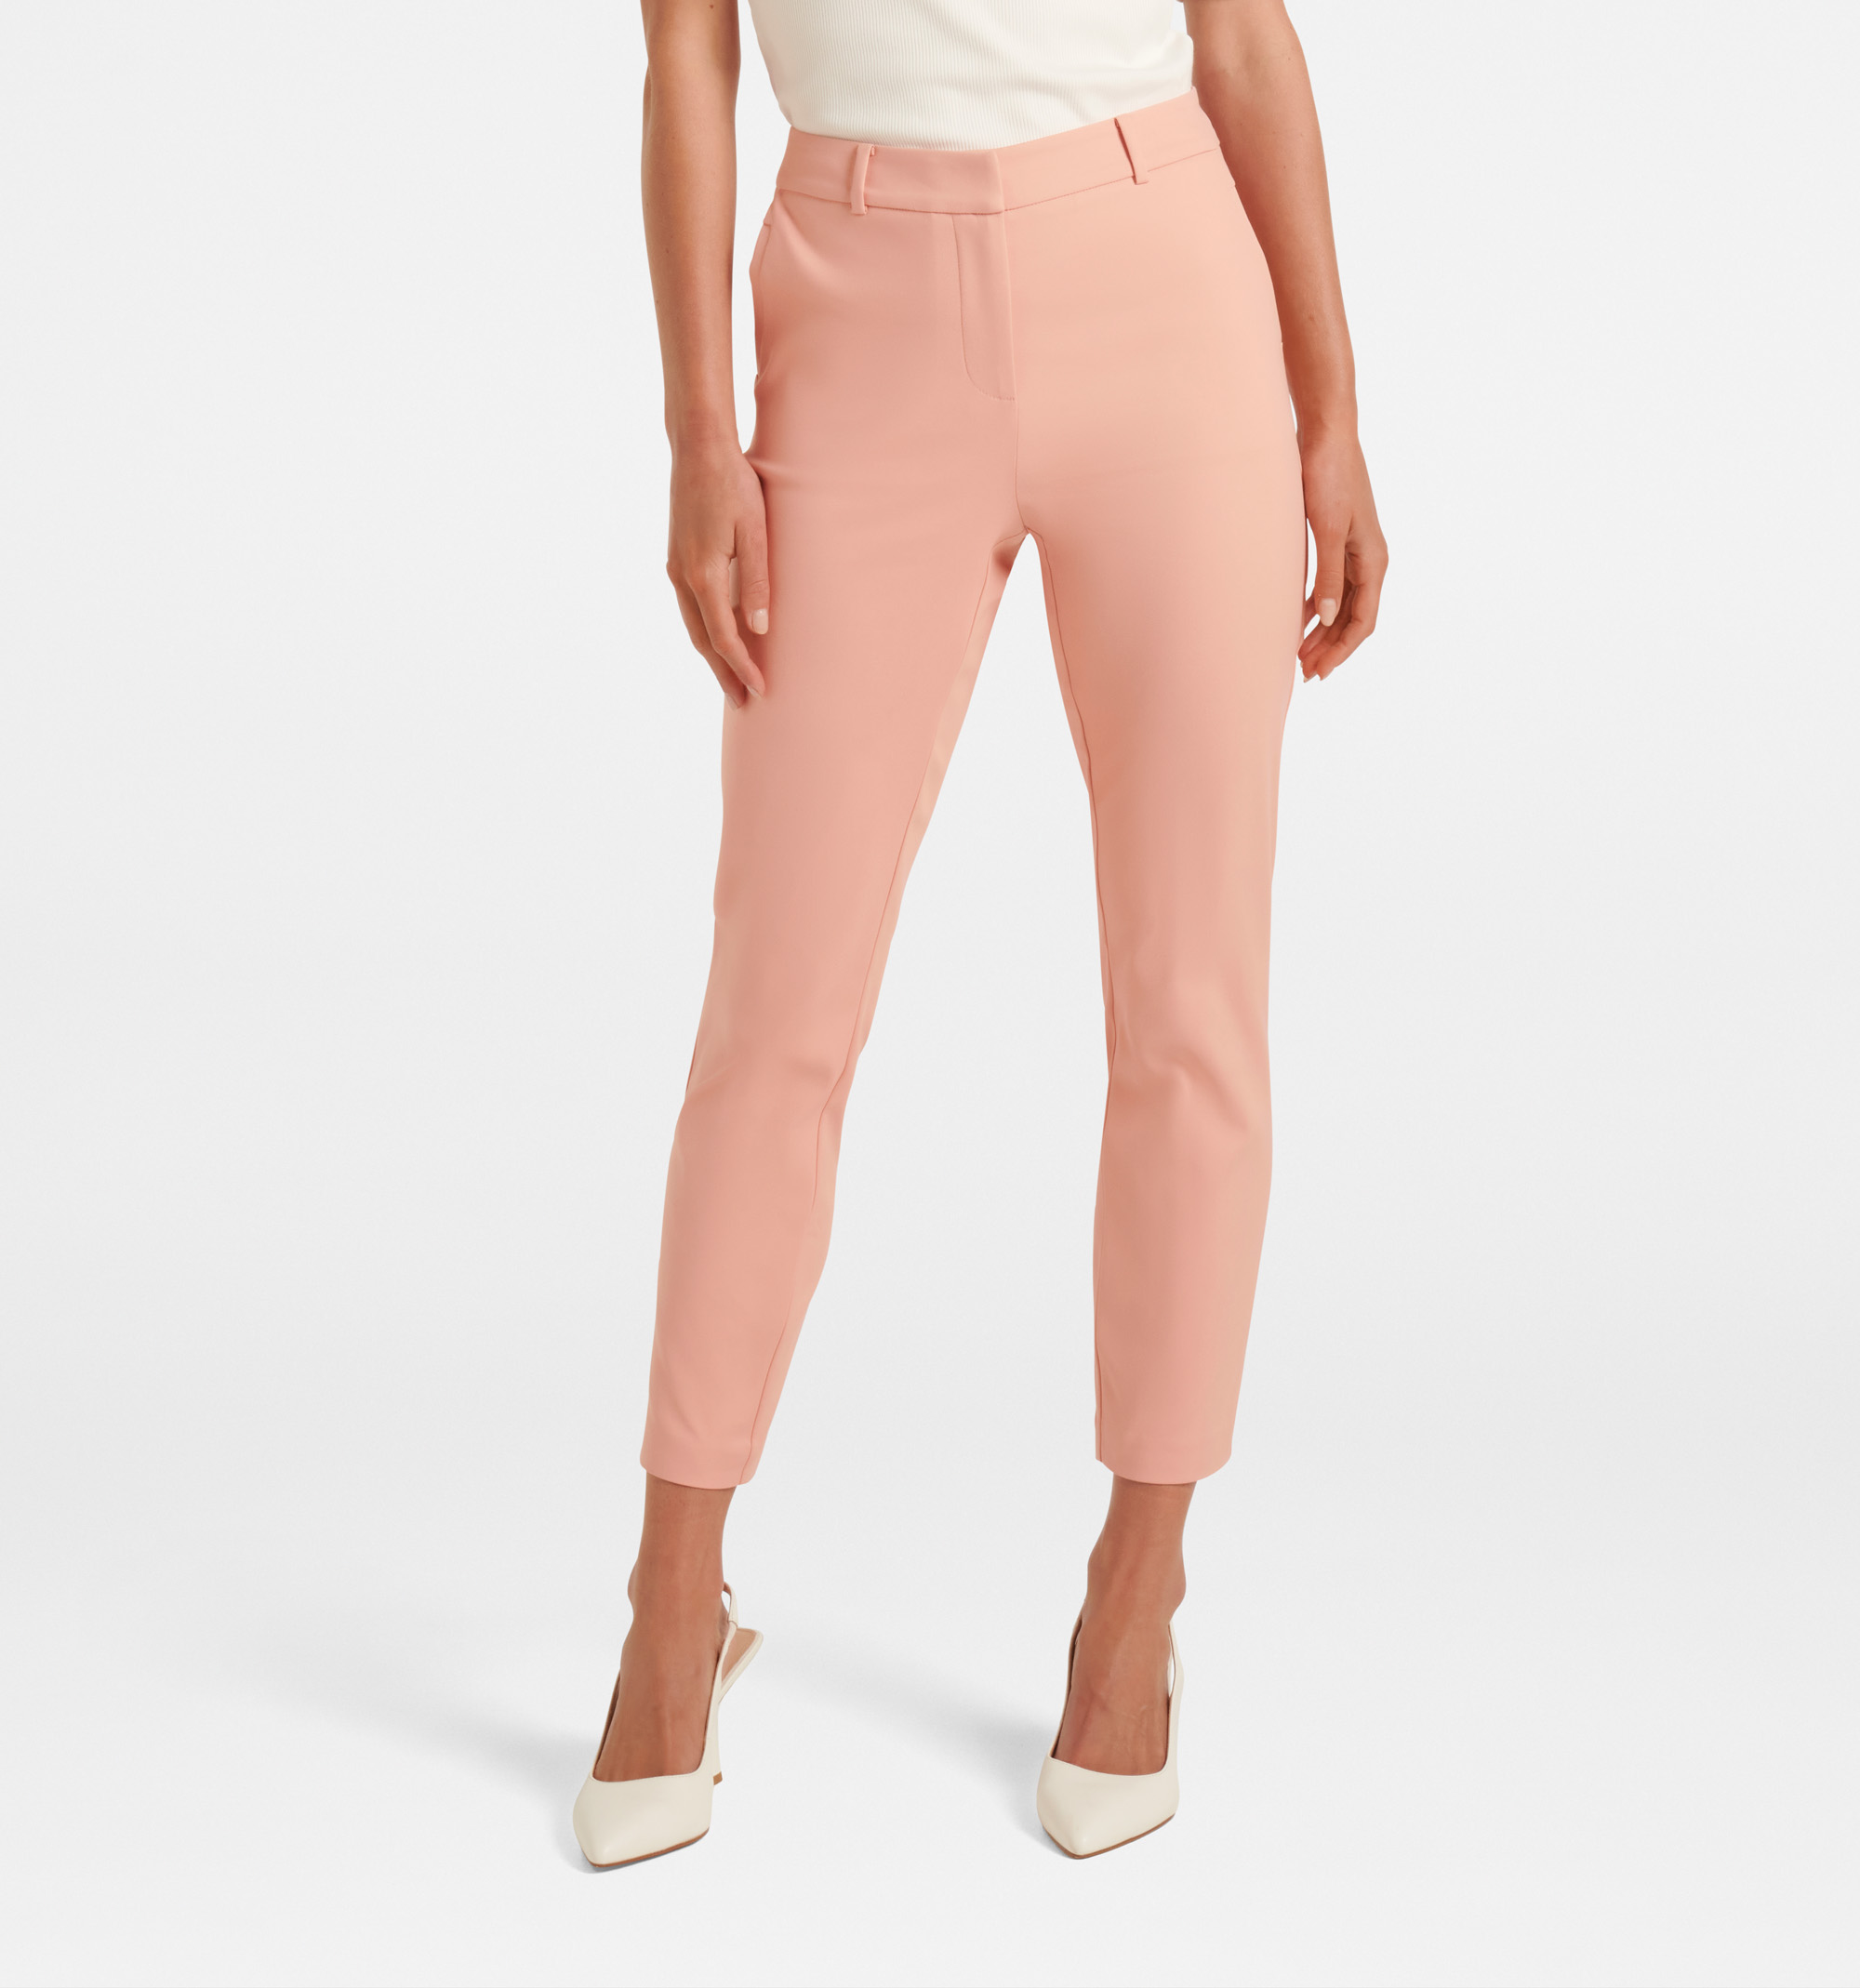 Buy Calvin Klein Organic Cotton Slim Fit Casual Trousers - NNNOW.com